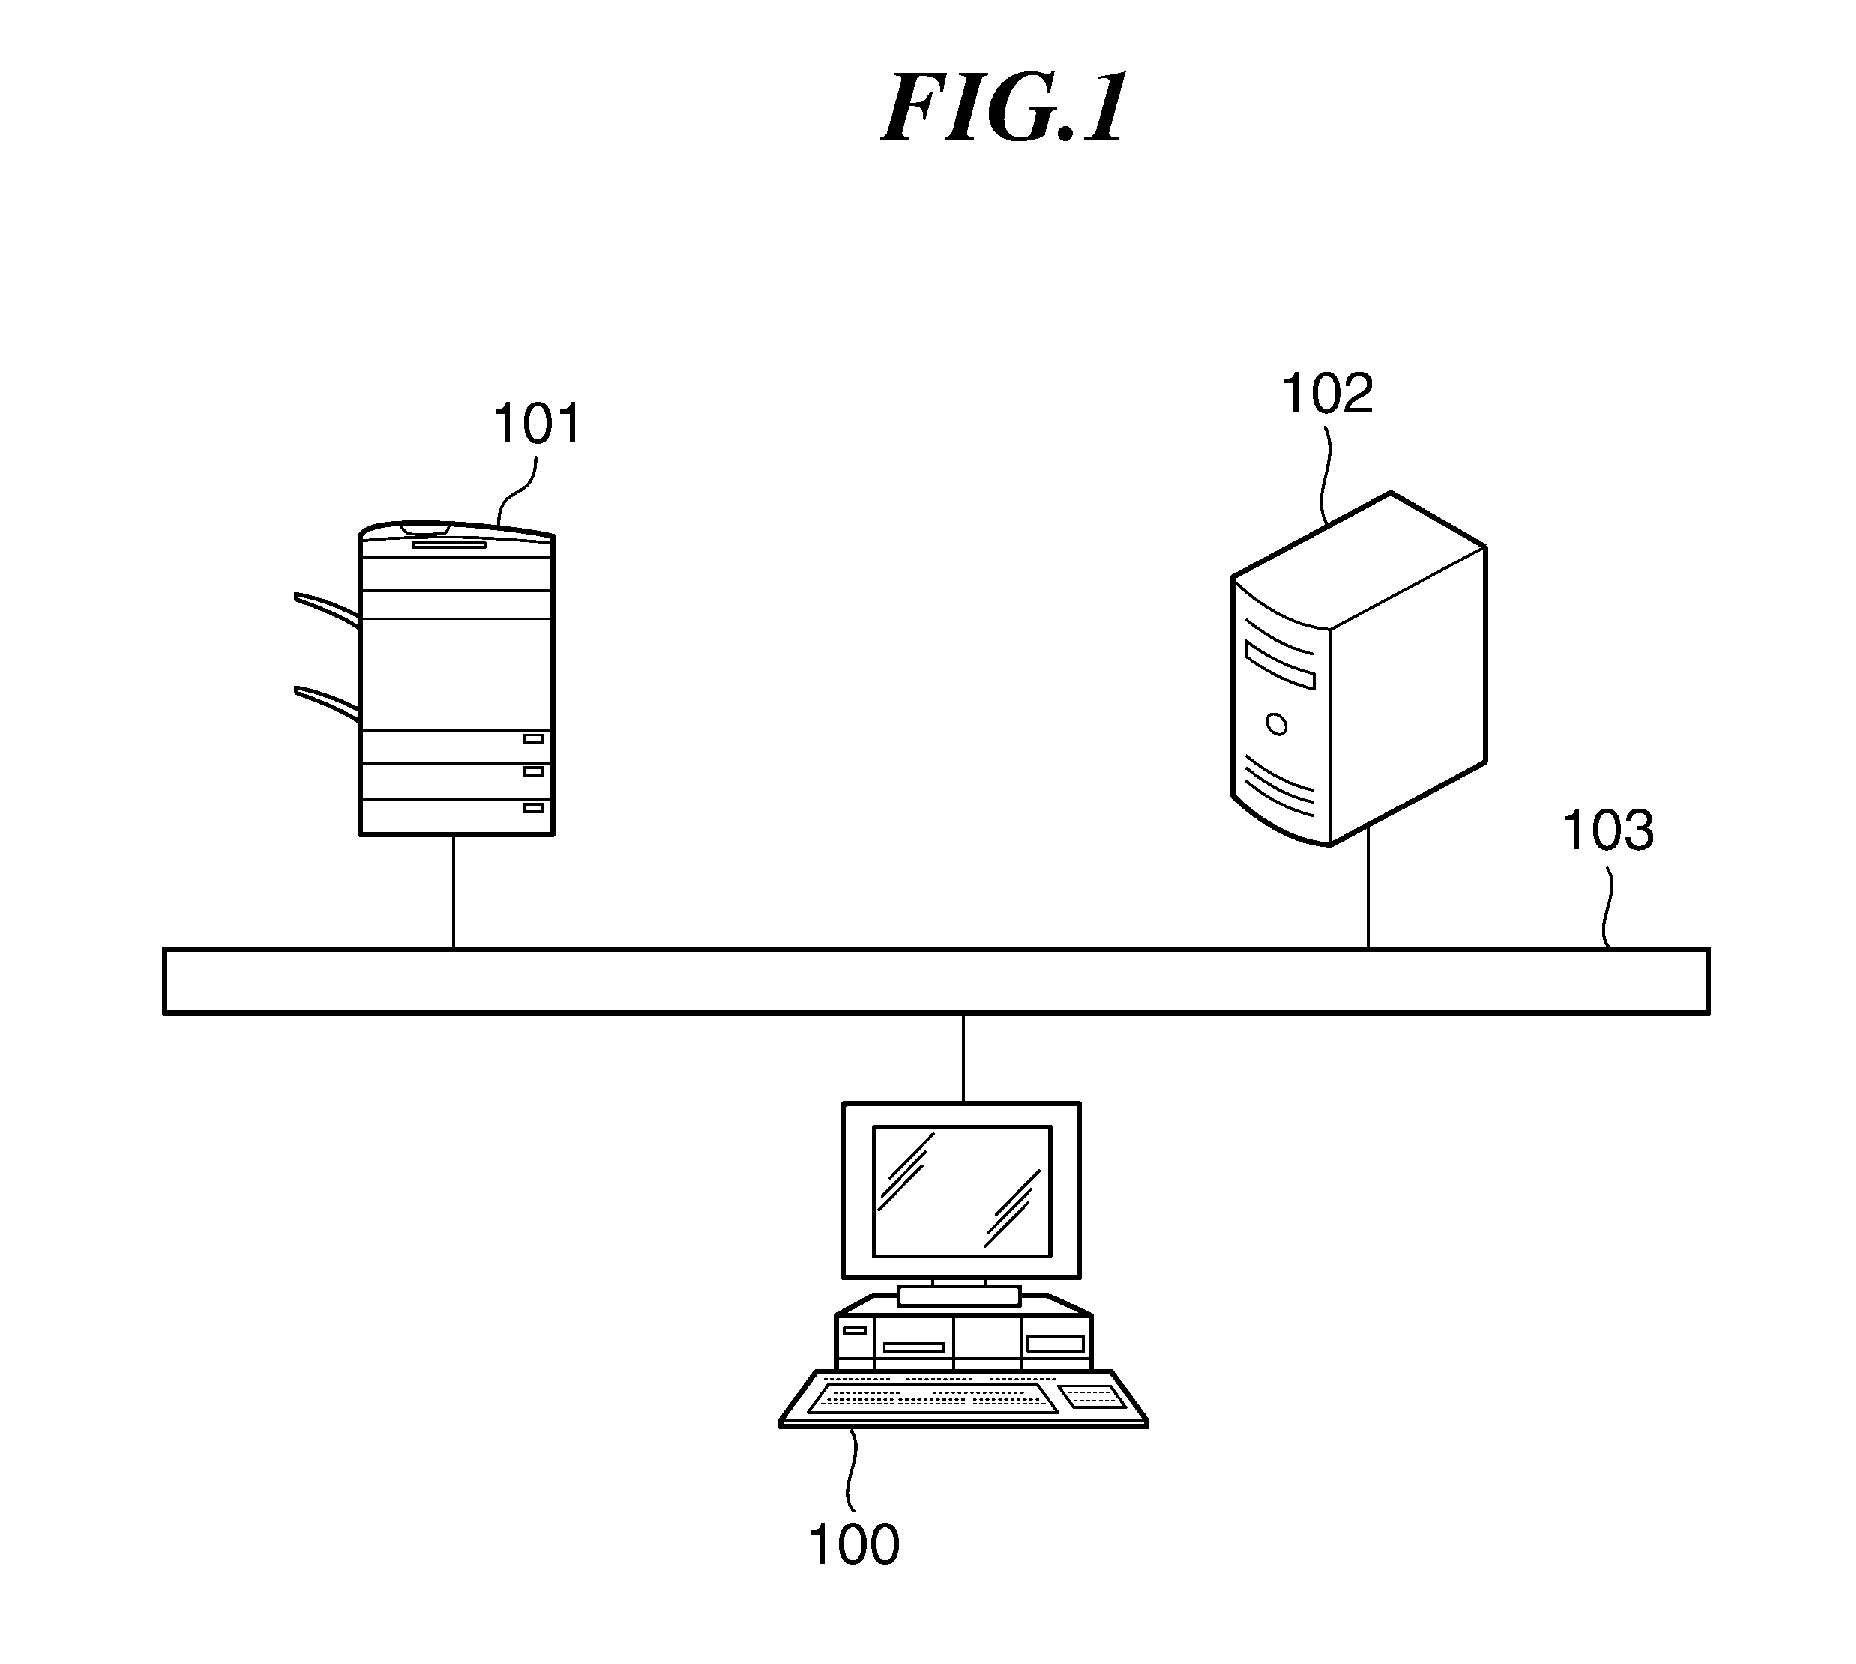 Information processing apparatus capable of setting configuration information for use by image processing apparatus, and control method and storage medium therefor